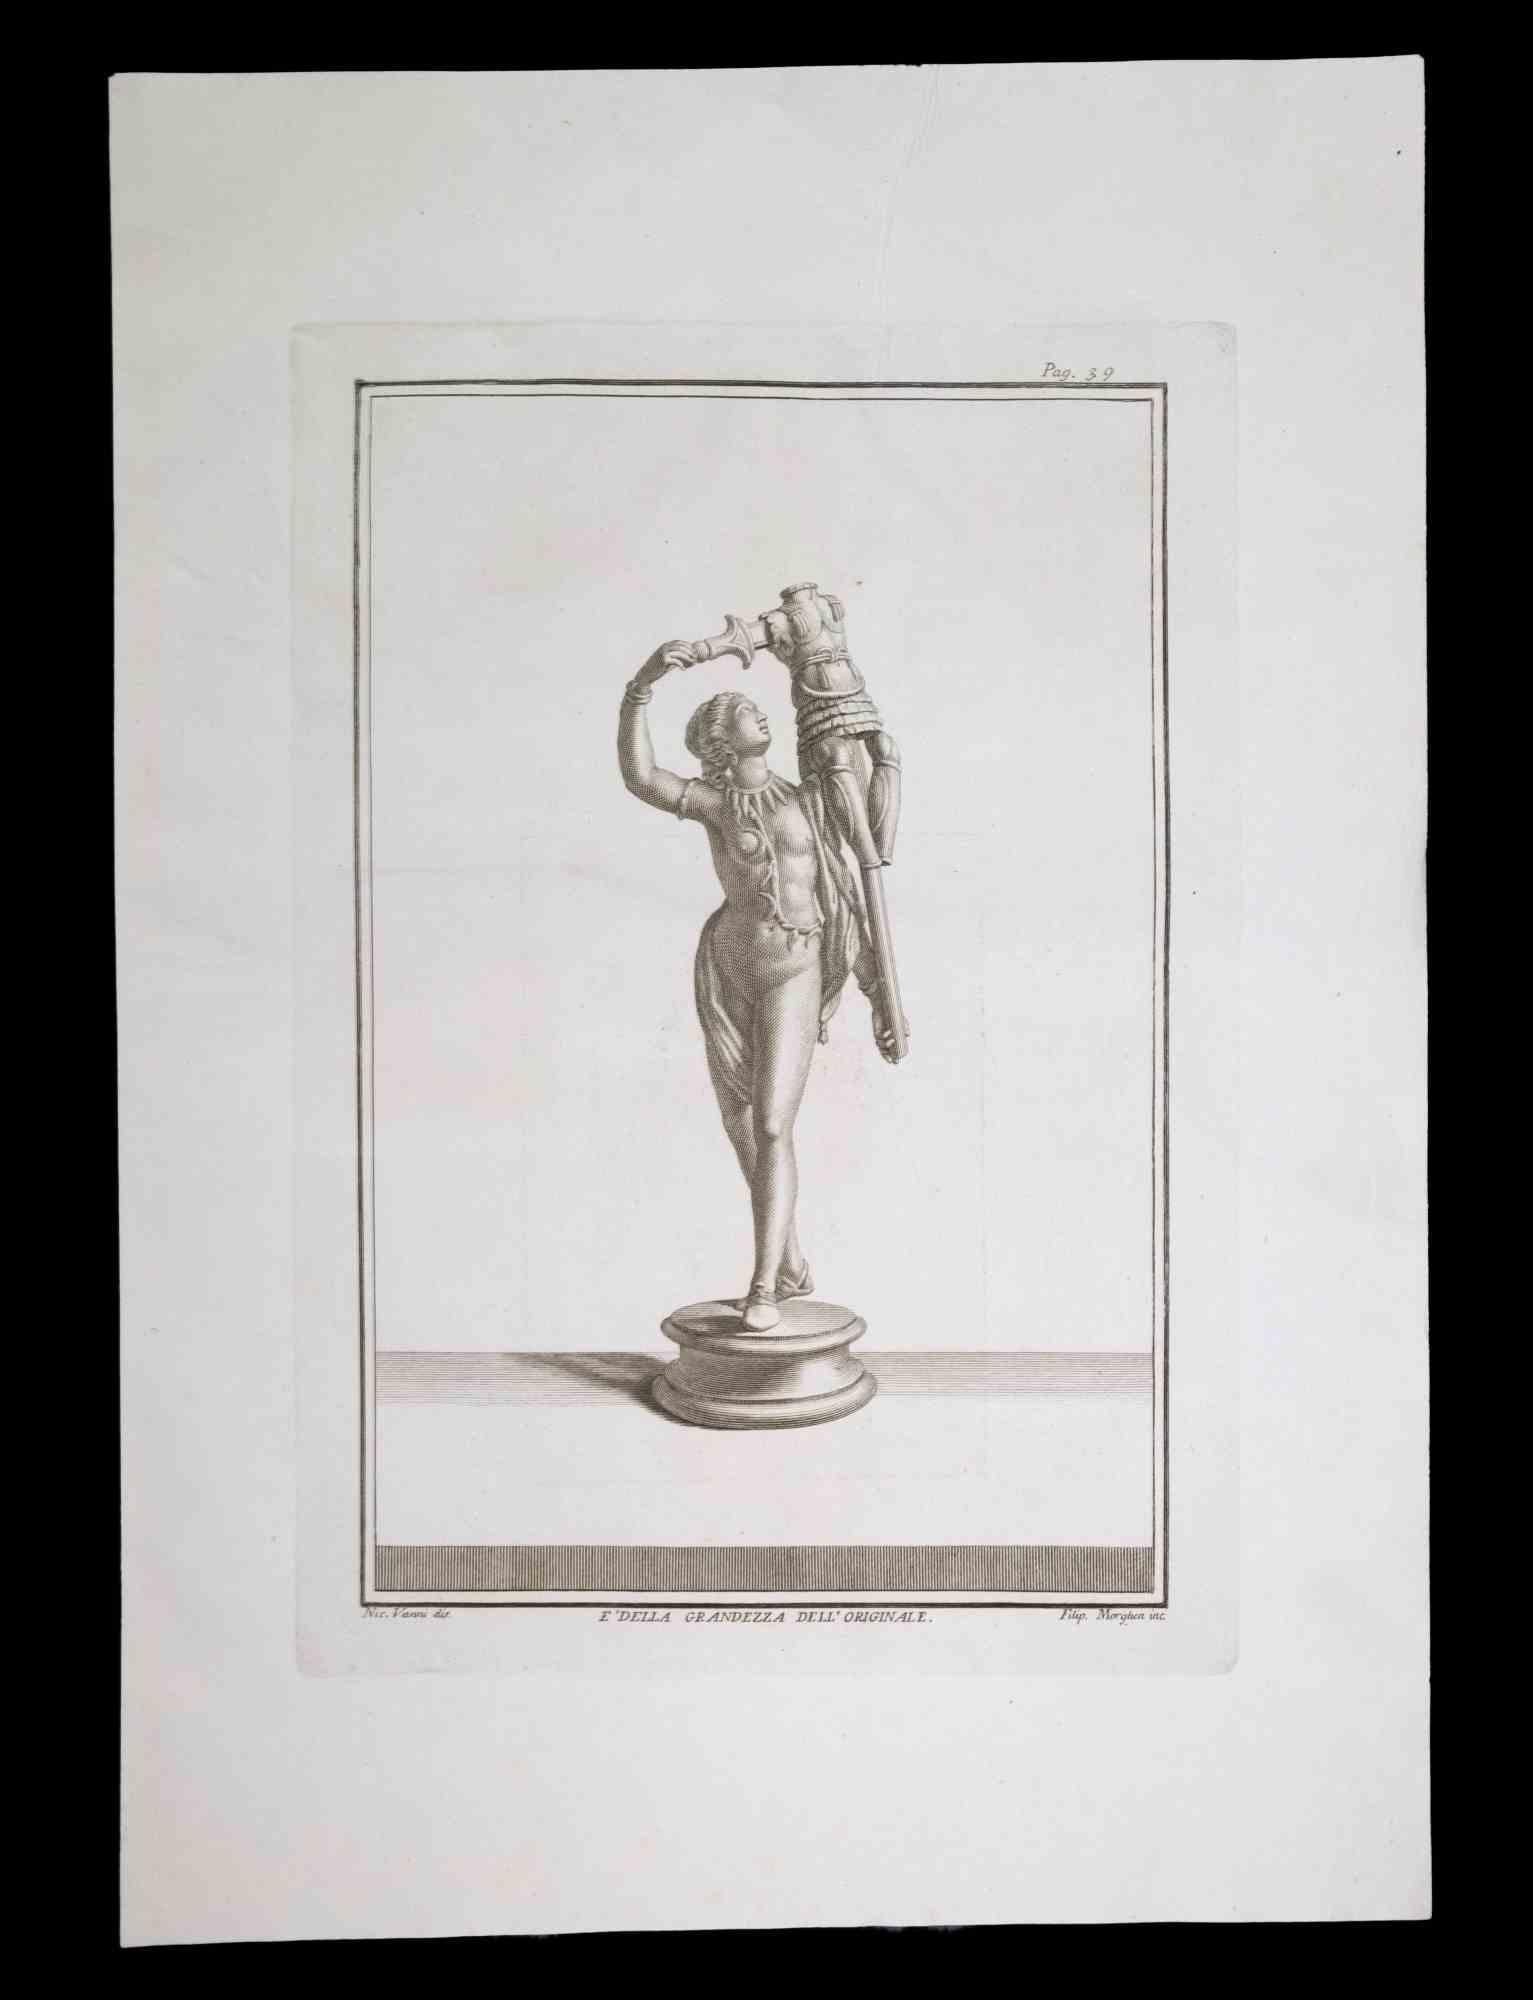 Ancient Roman Statue, from the series "Antiquities of Herculaneum", is an original etching on paper realized by Filippo Morghen in the 18th century.

Signed on the plate, on the lower right.

Good conditions.